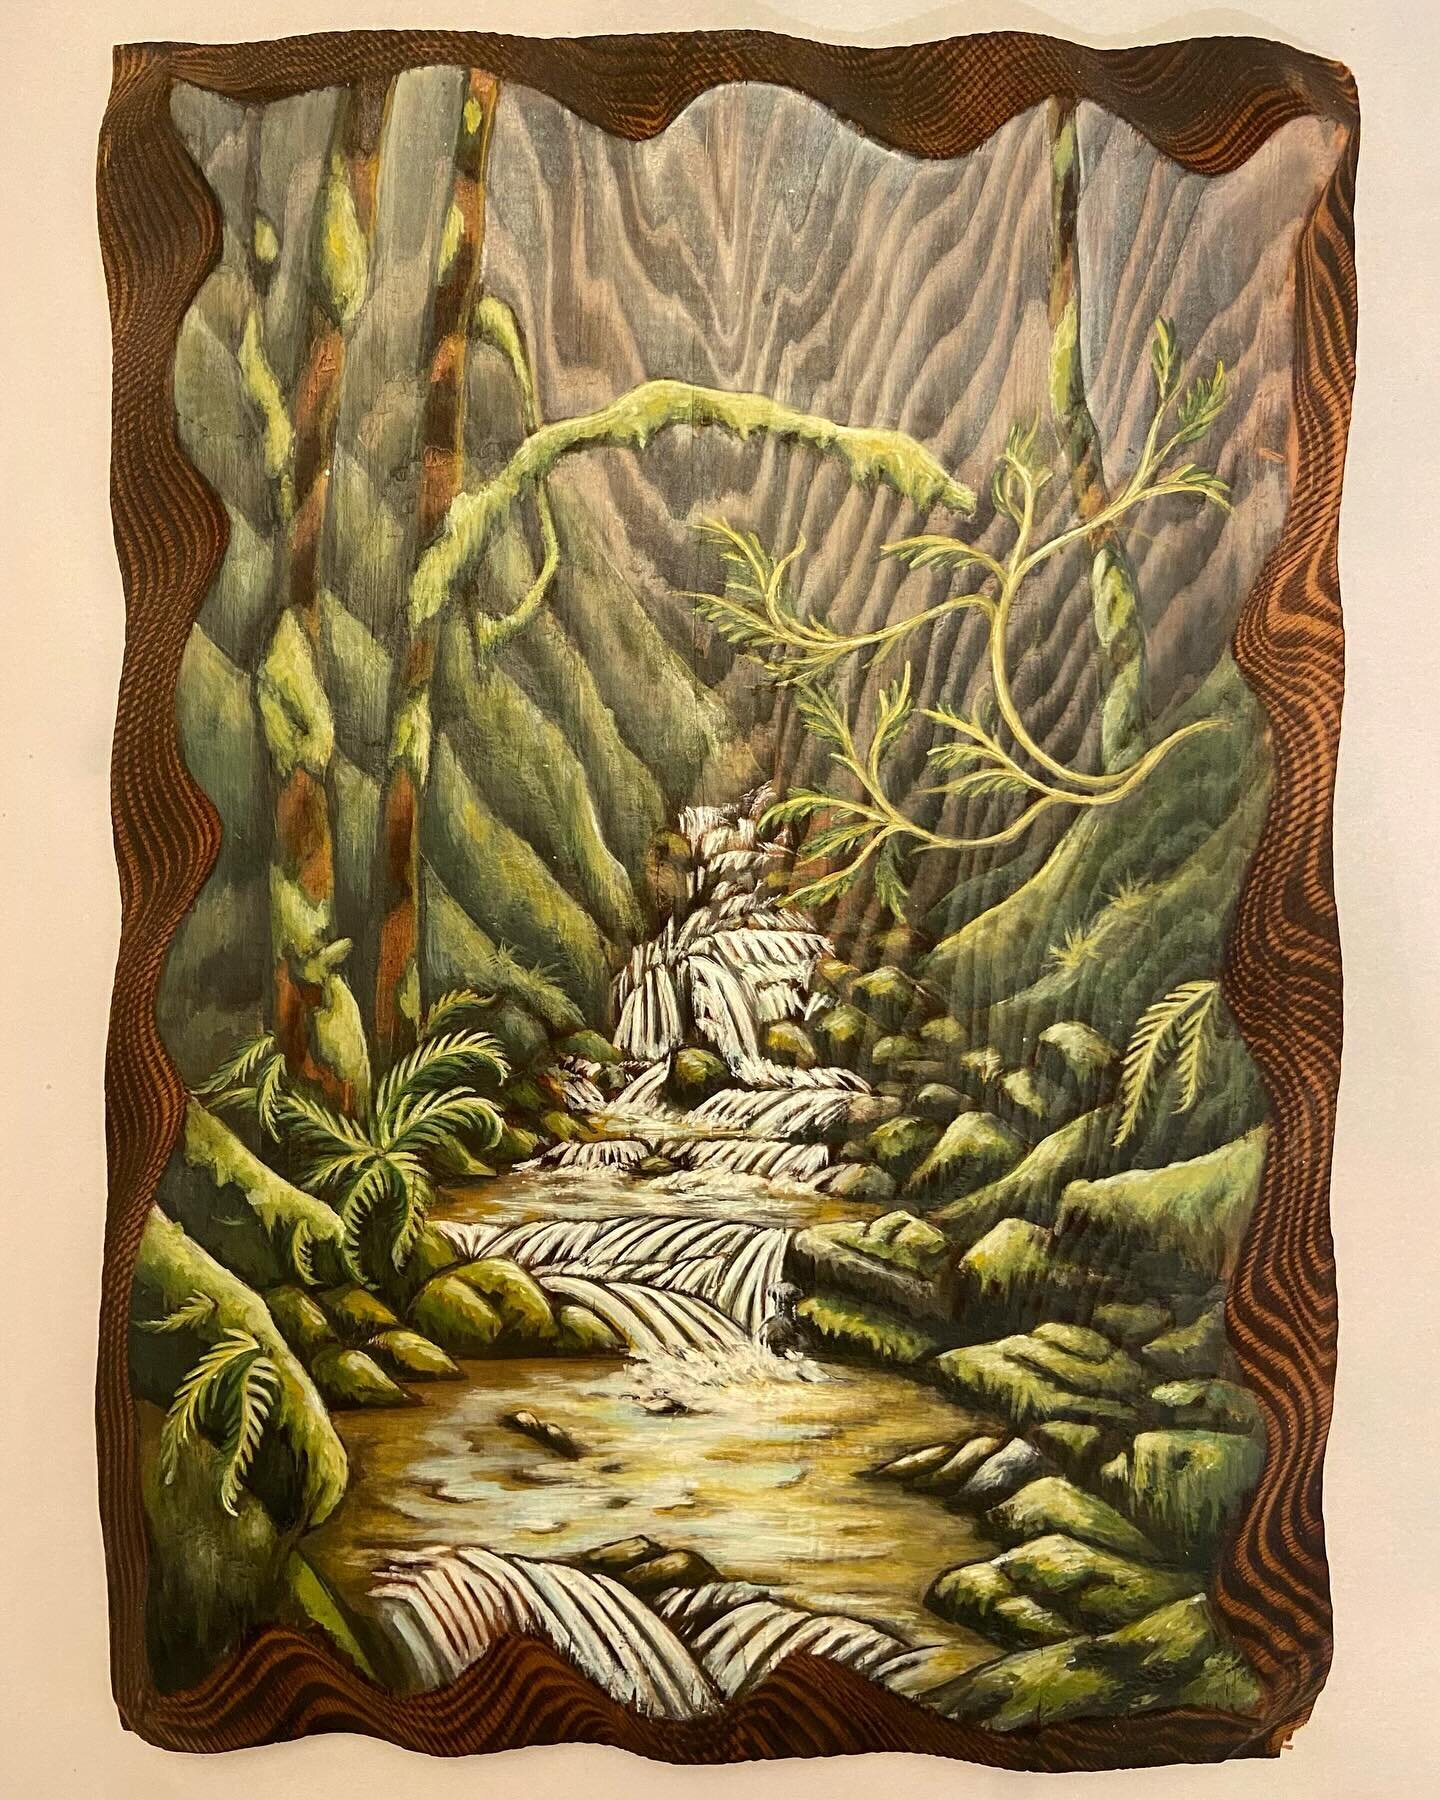 I painted this on a beautiful little piece of salvaged redwood. So lucky to have created this one in plein air at our beloved cabin in the woods on Mt. Hood. I&rsquo;ll always cherish those nature walks as a new mom, and our little creek, and all the